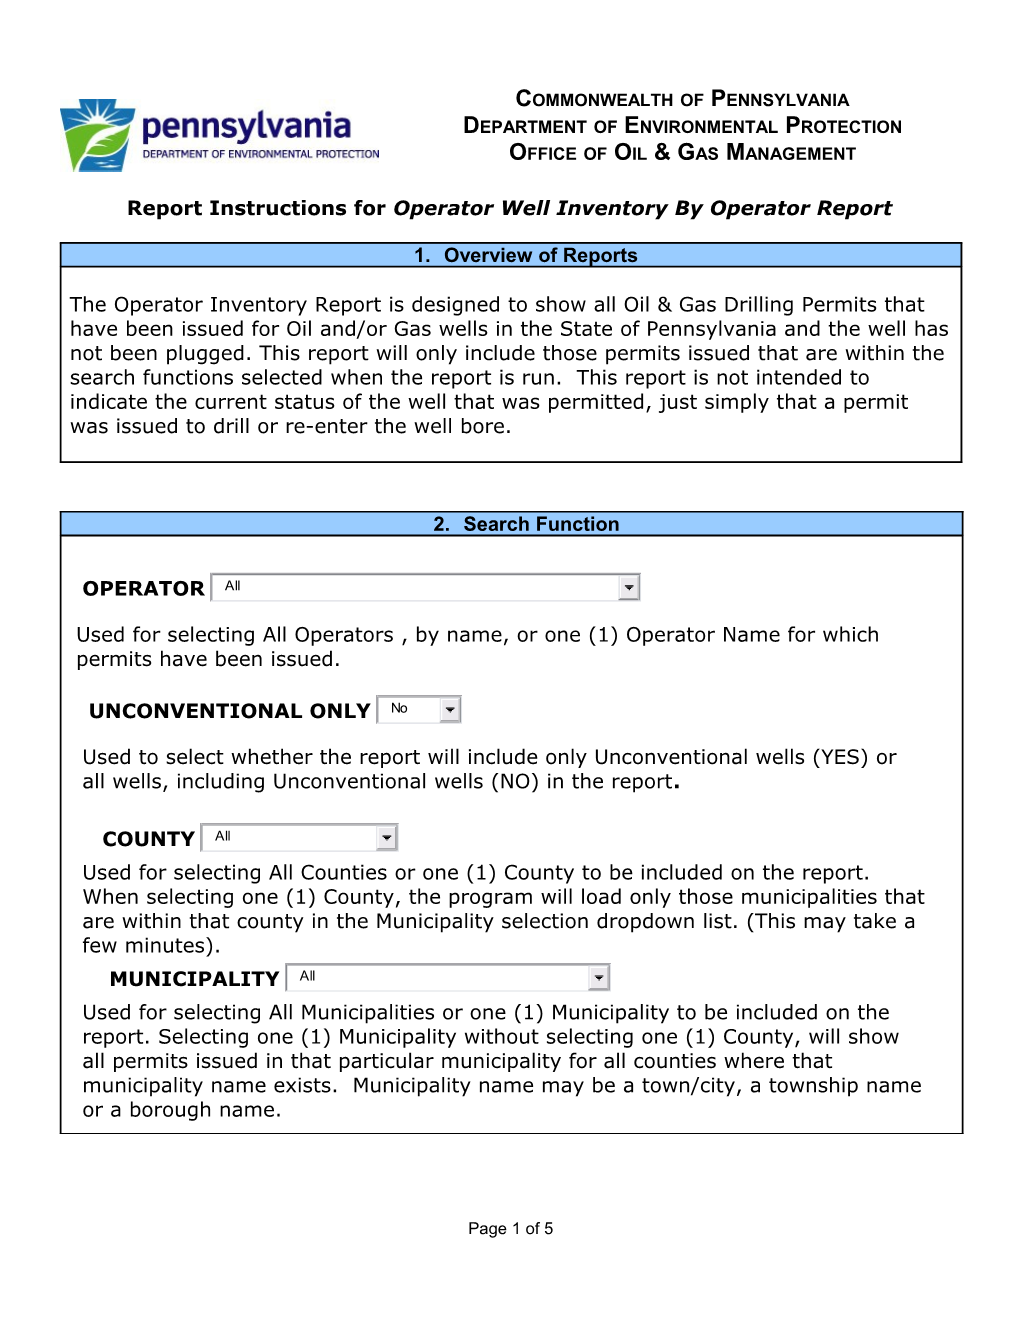 Report Instructions for Operator Well Inventoryby Operatorreport